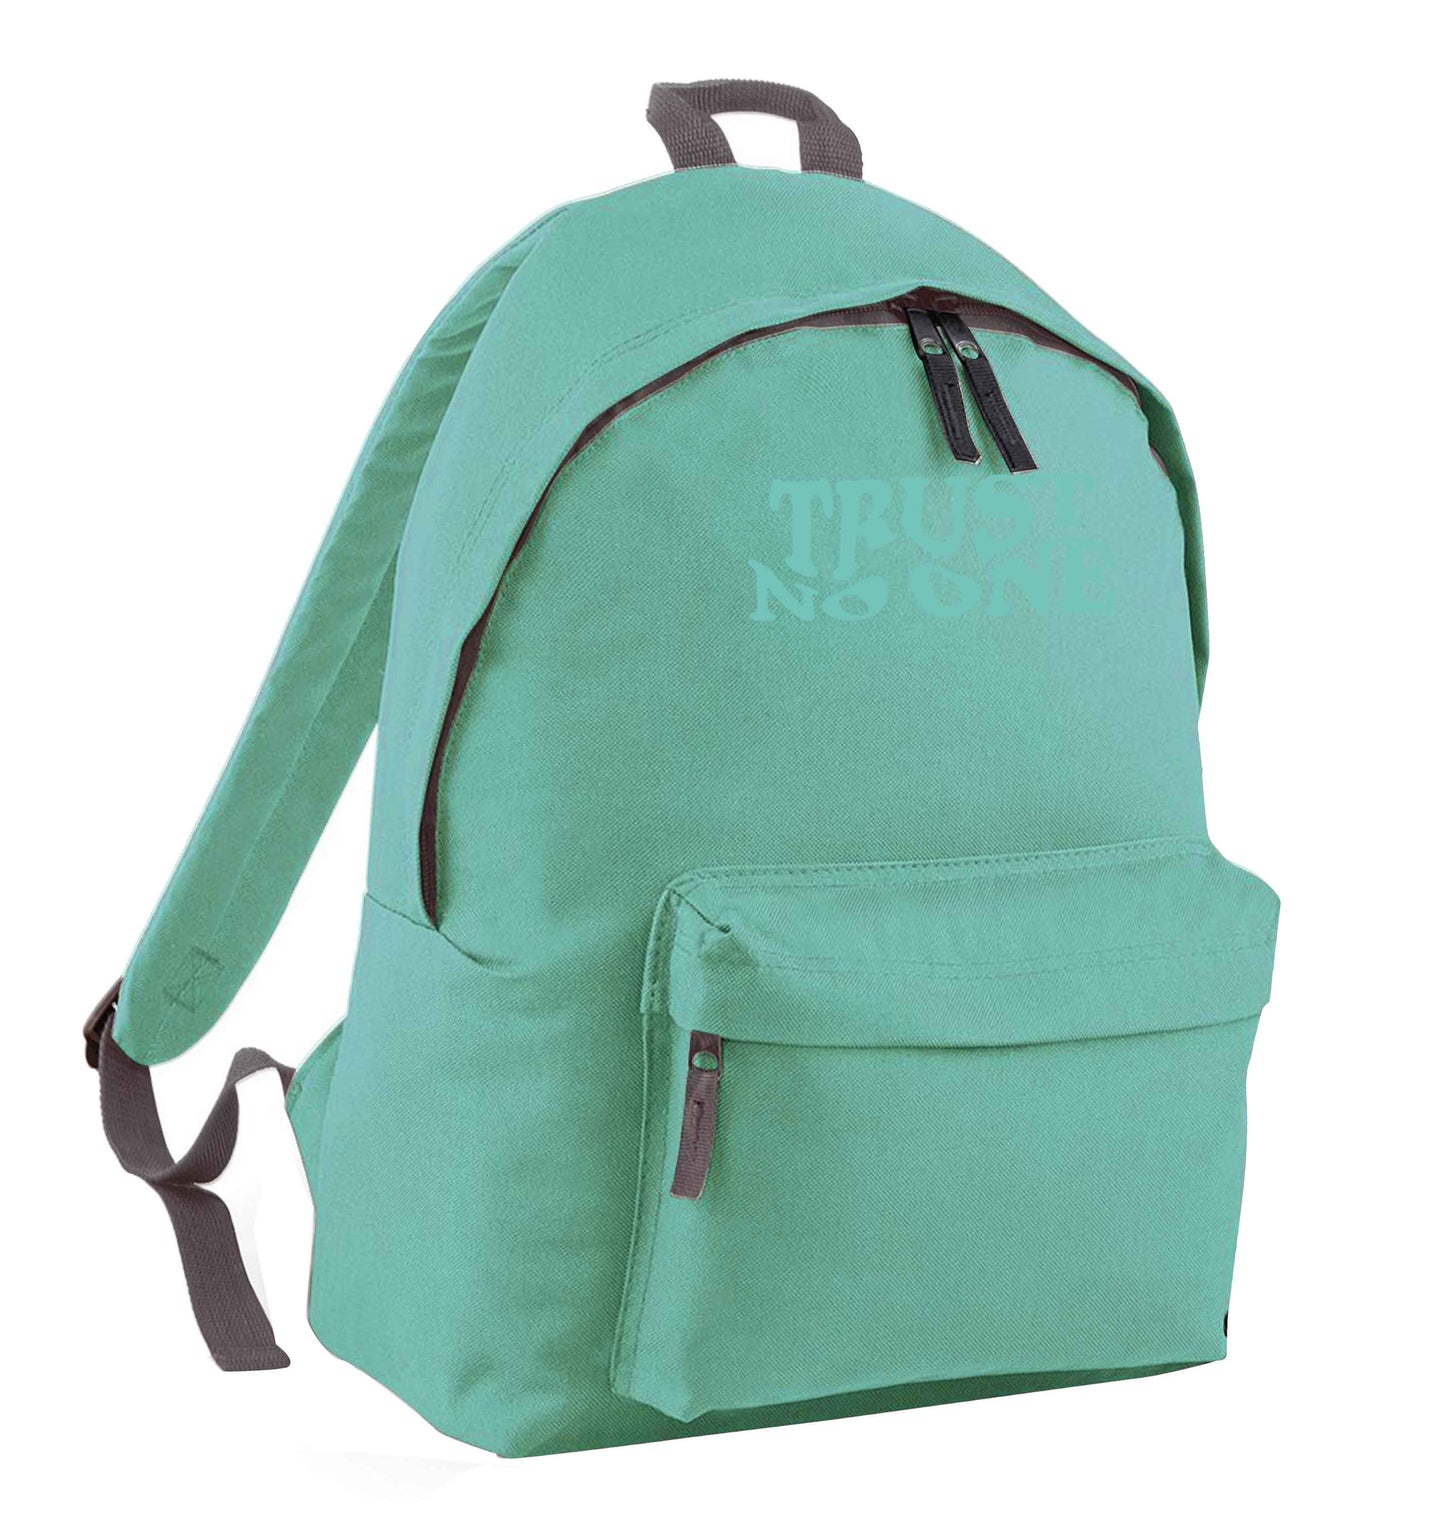 Trust no one mint adults backpack